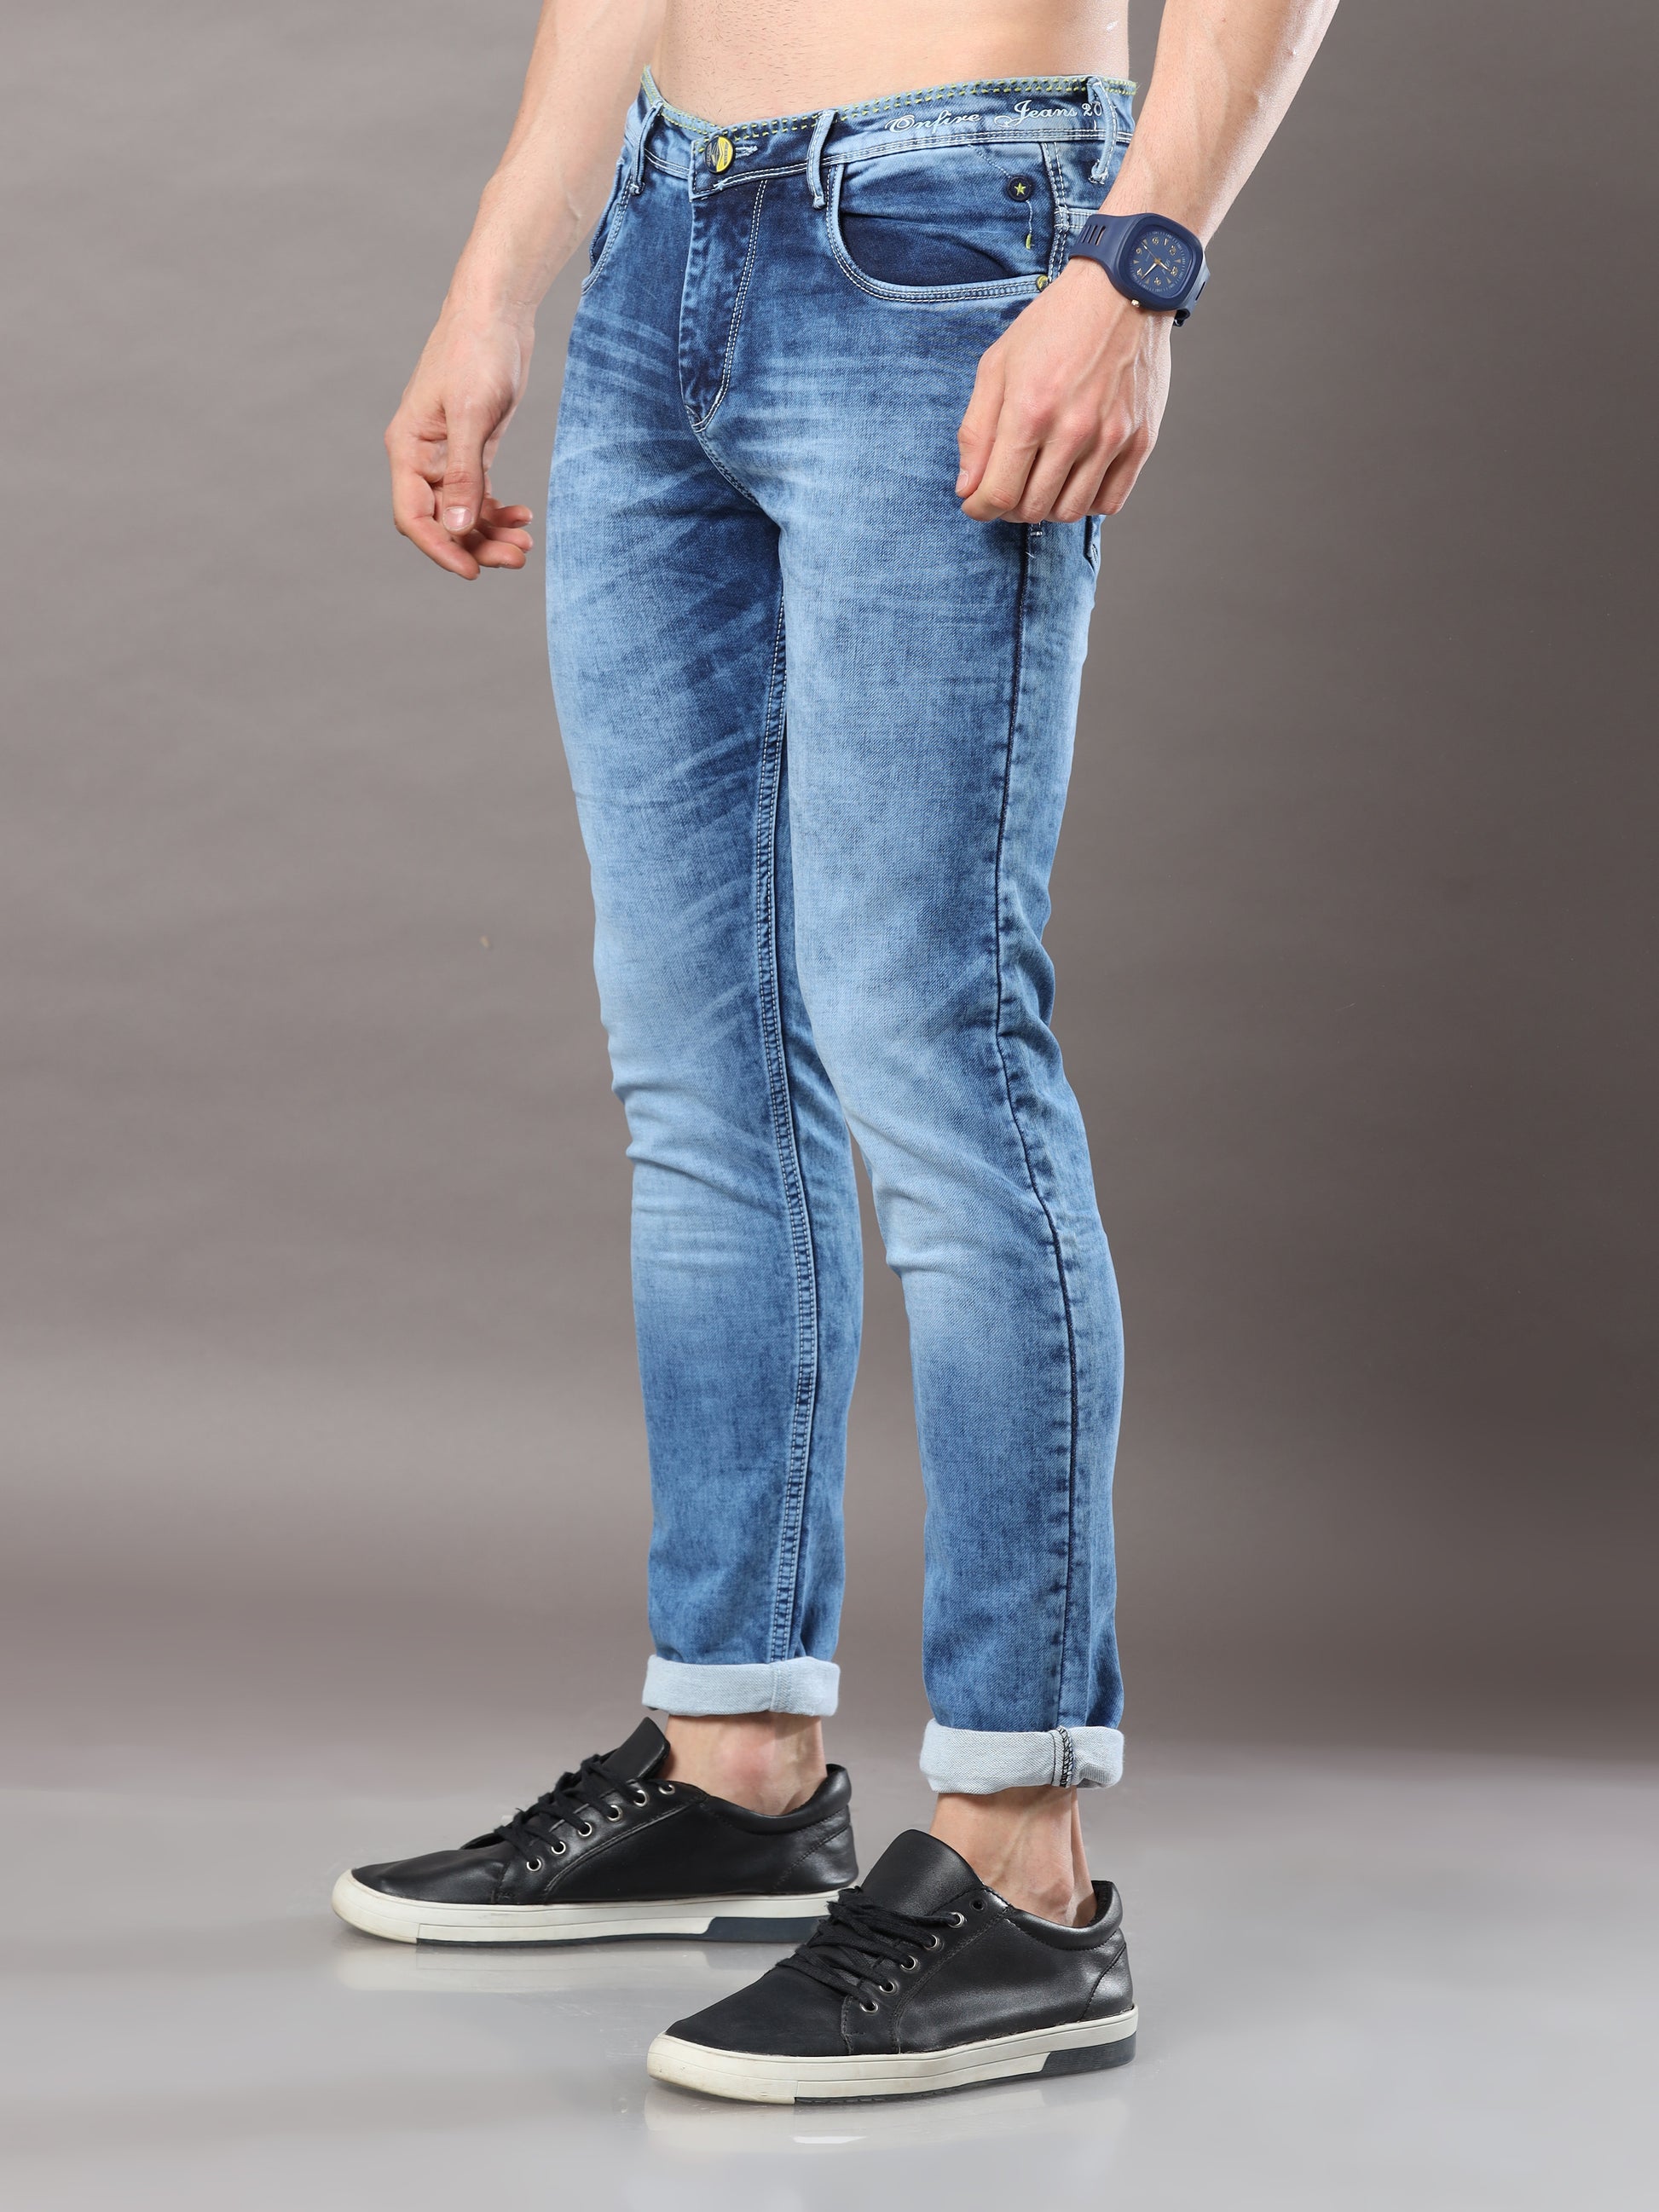 Onfire Admiral Light Blue Skinny Jeans - A1616A